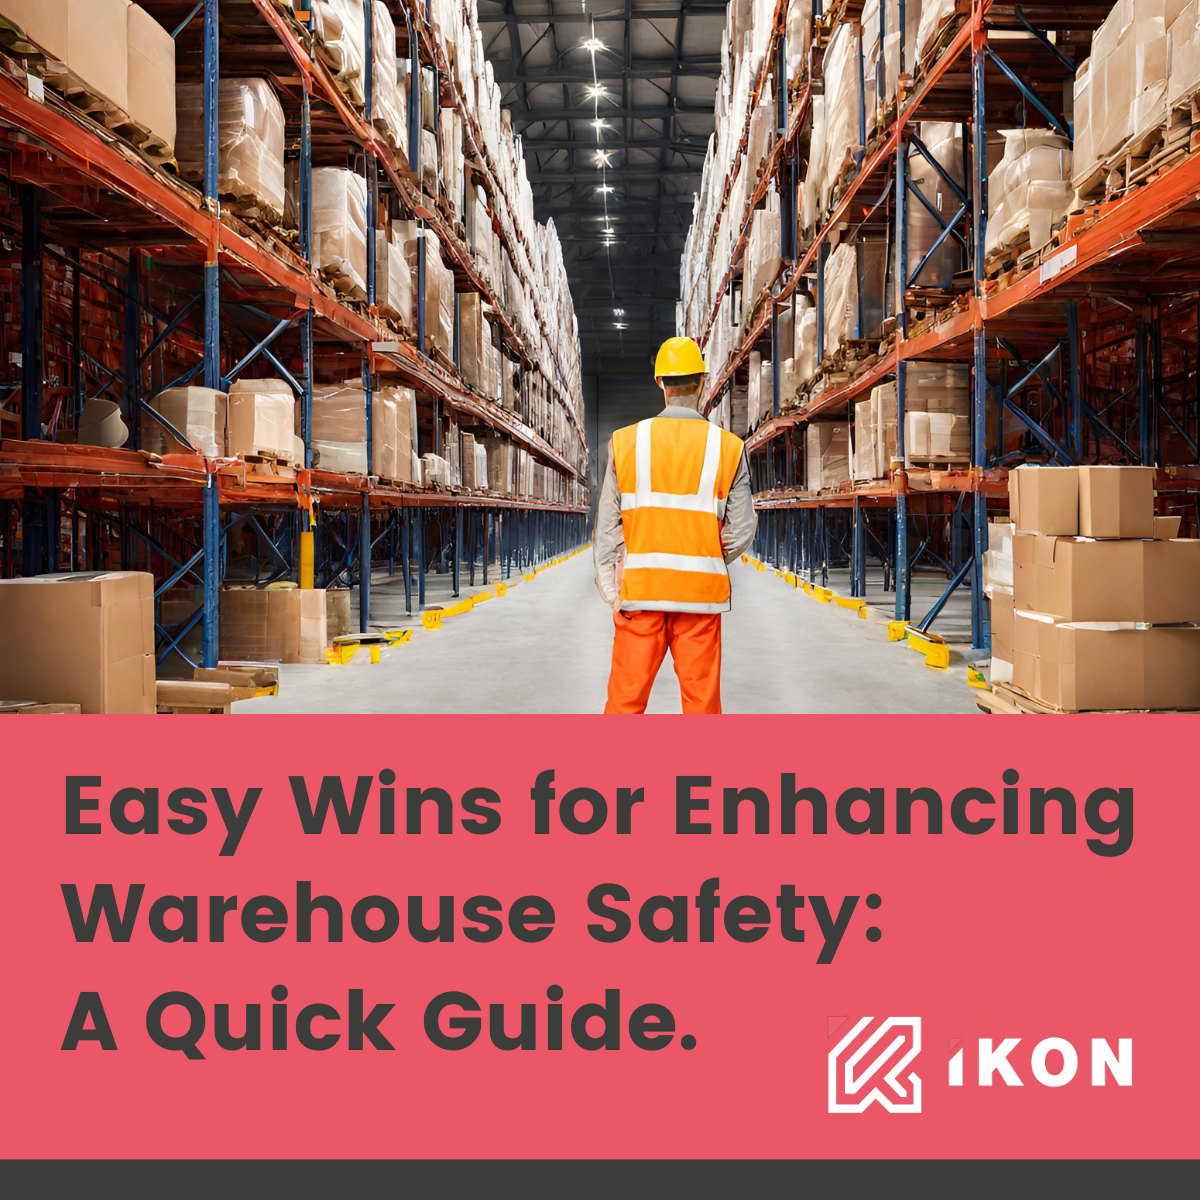 EASY WINS FOR ENHANCING WAREHOUSE SAFETY: A QUICK GUIDE